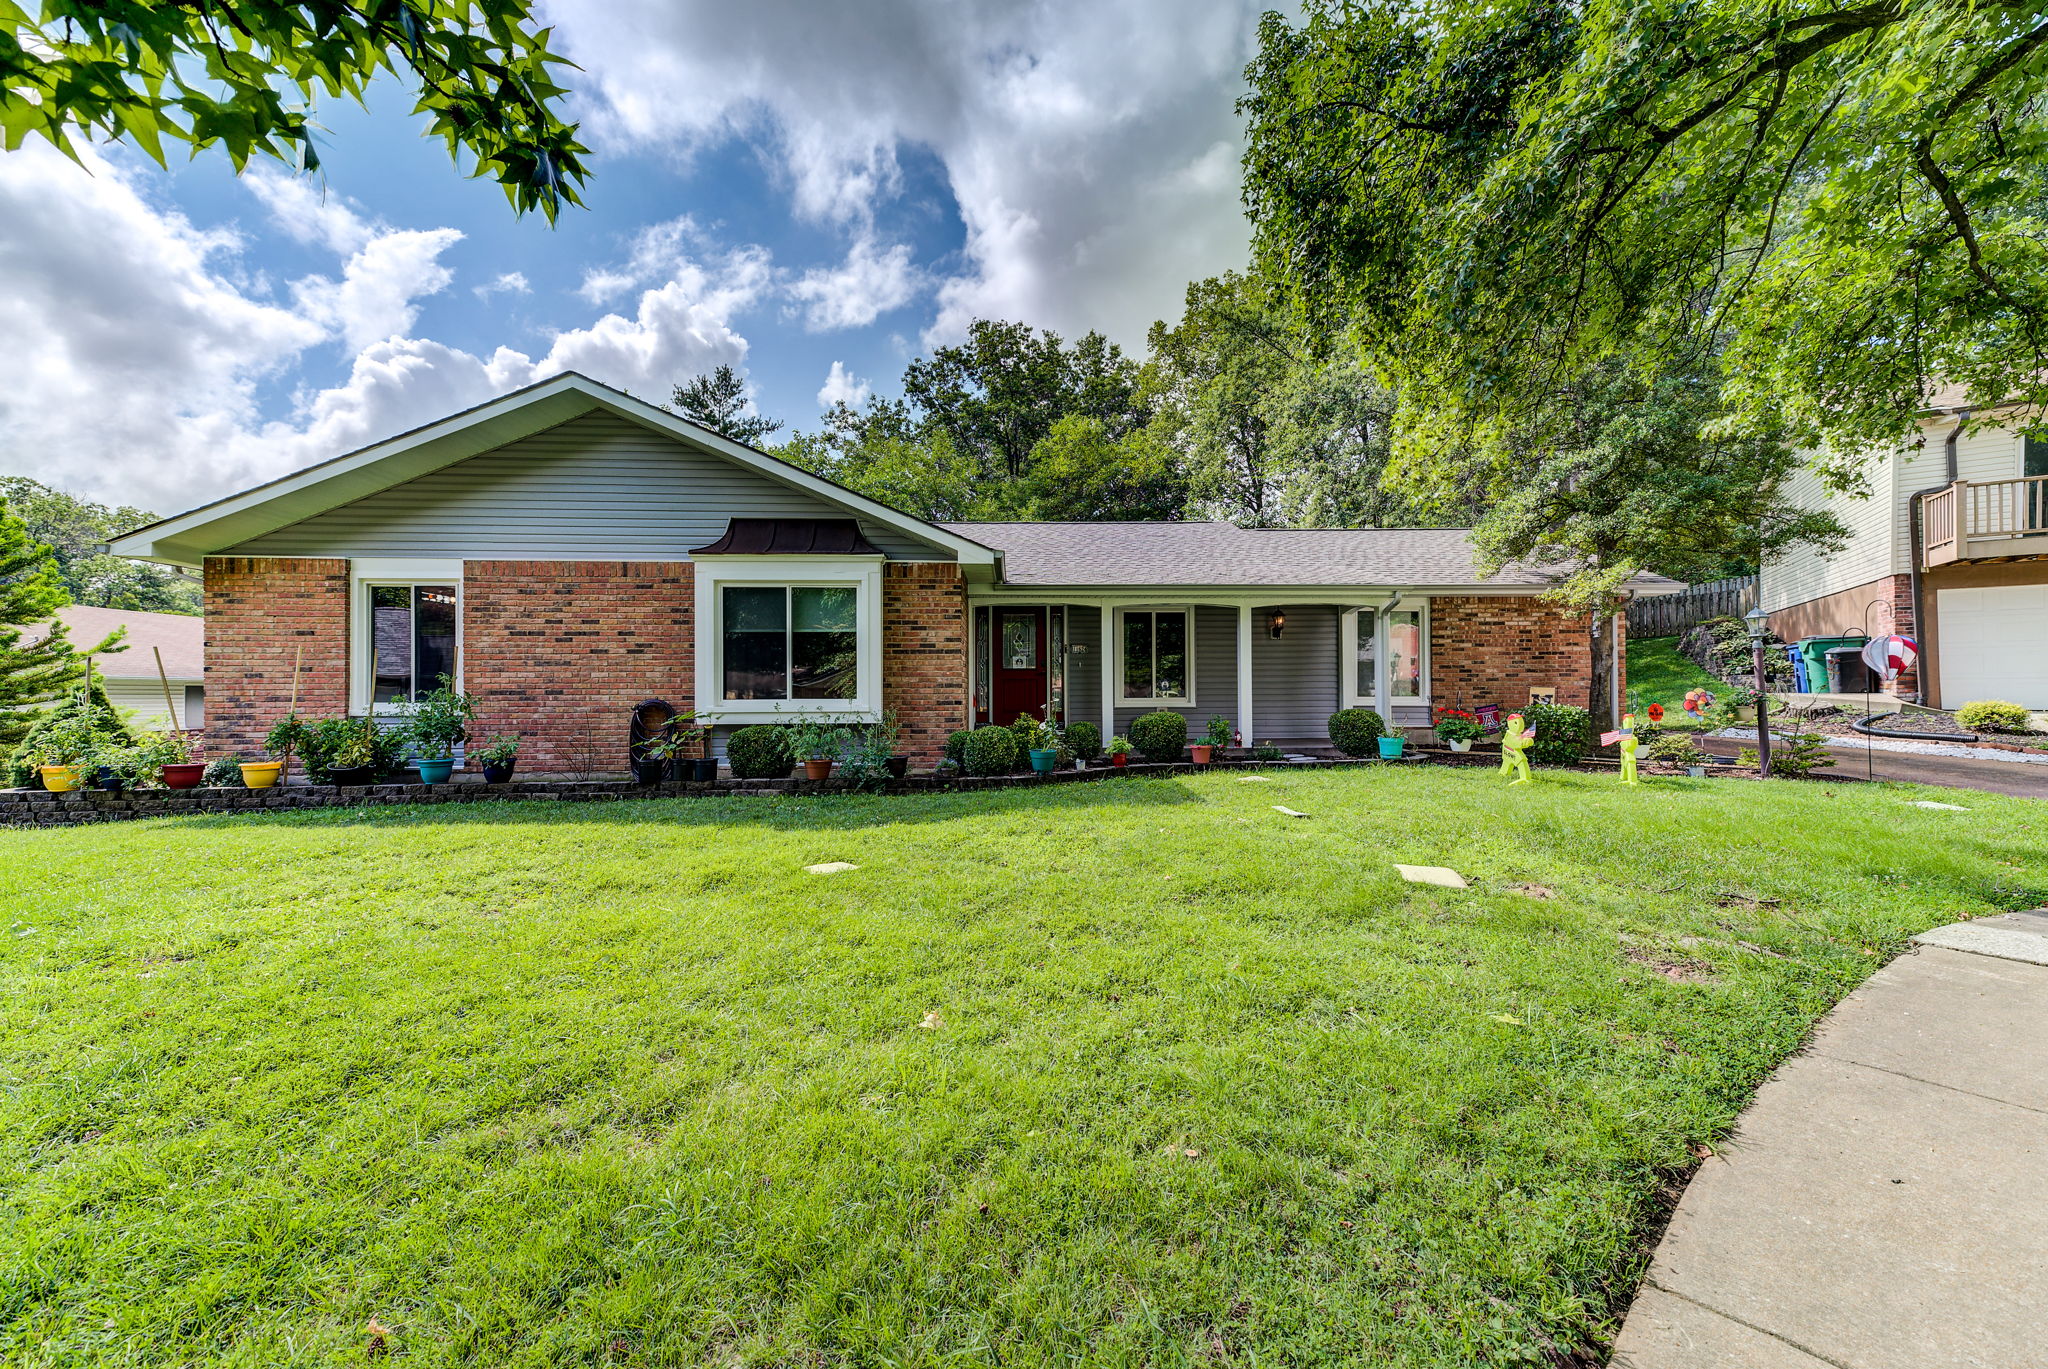  11624 Chieftain Dr, St. Louis, MO 63146, US